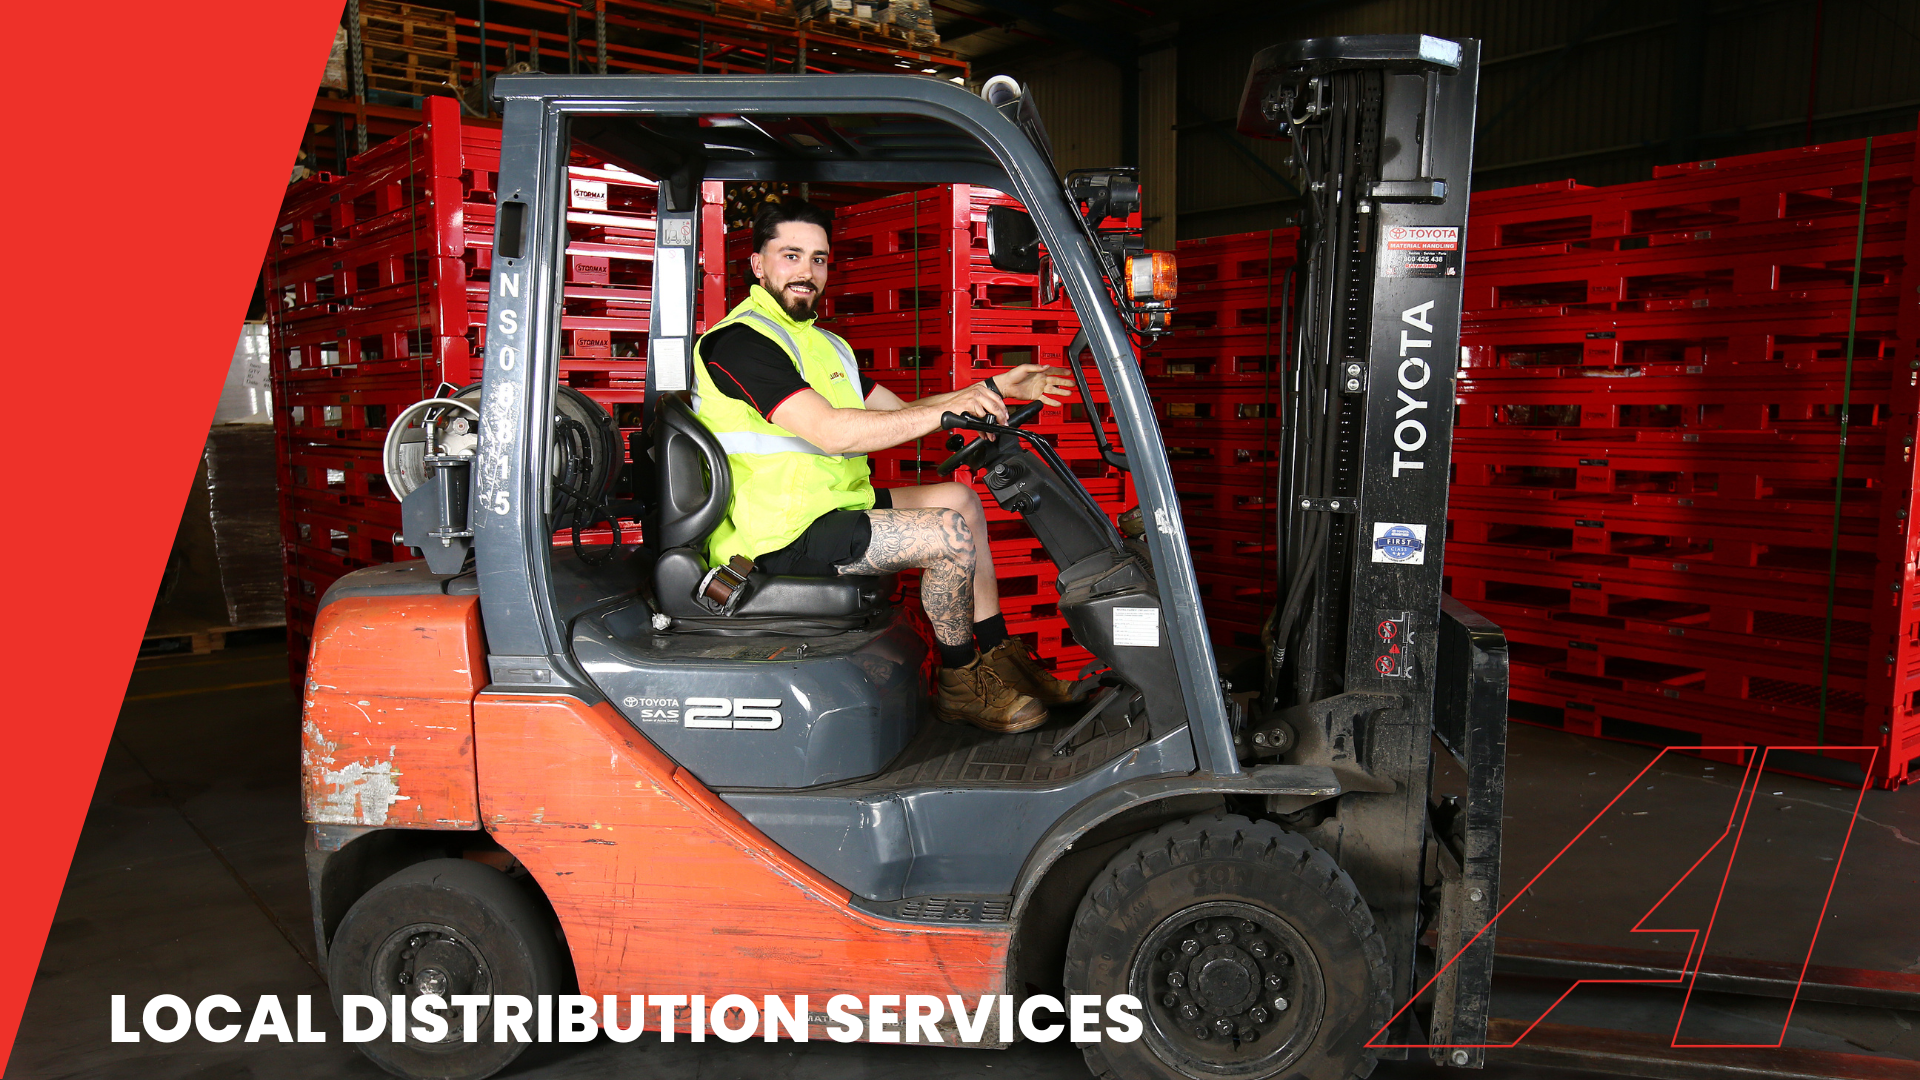 Local Distribution Services